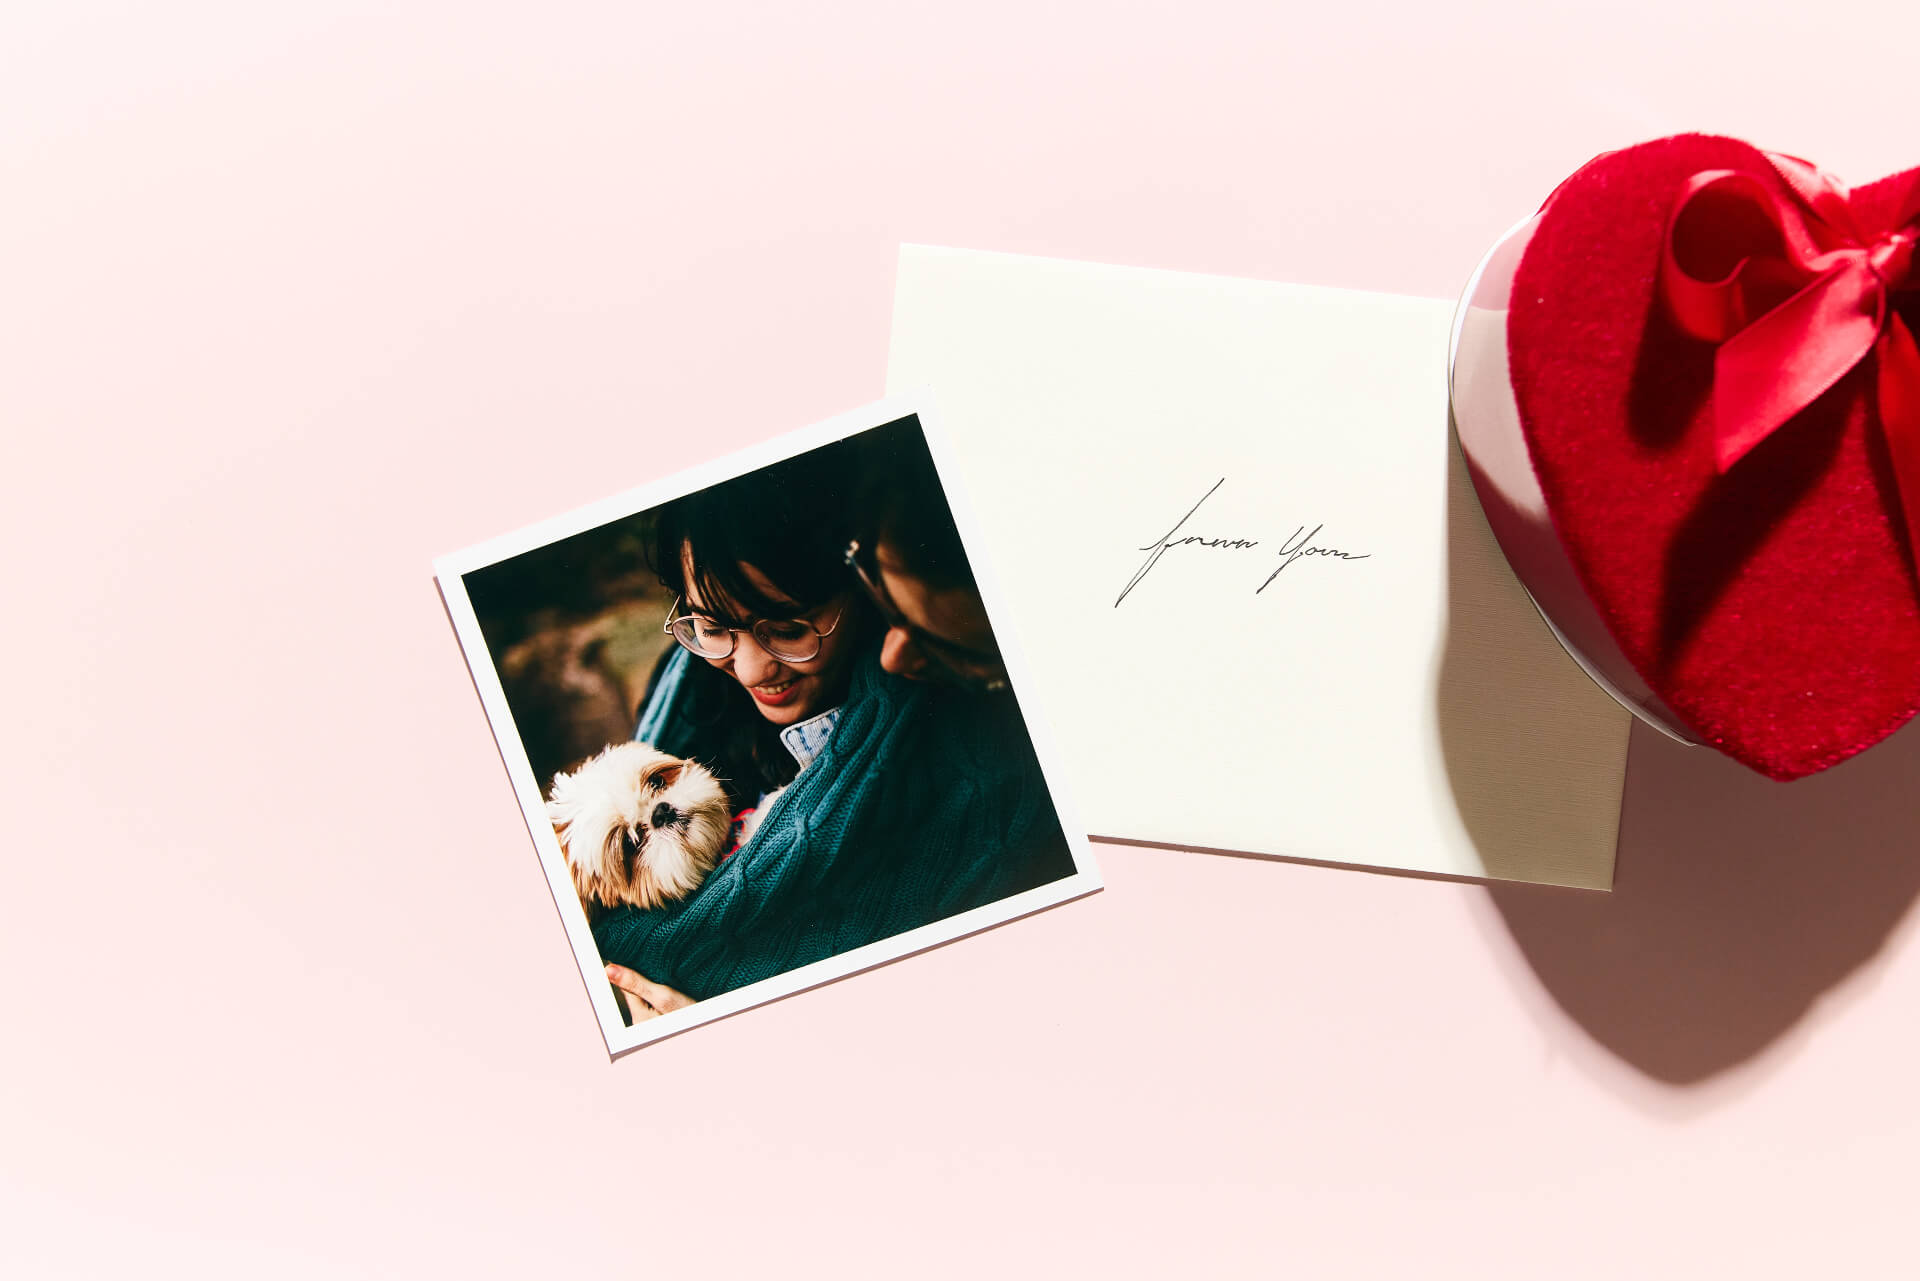 Our Favorite Valentine’s Day Photo Projects